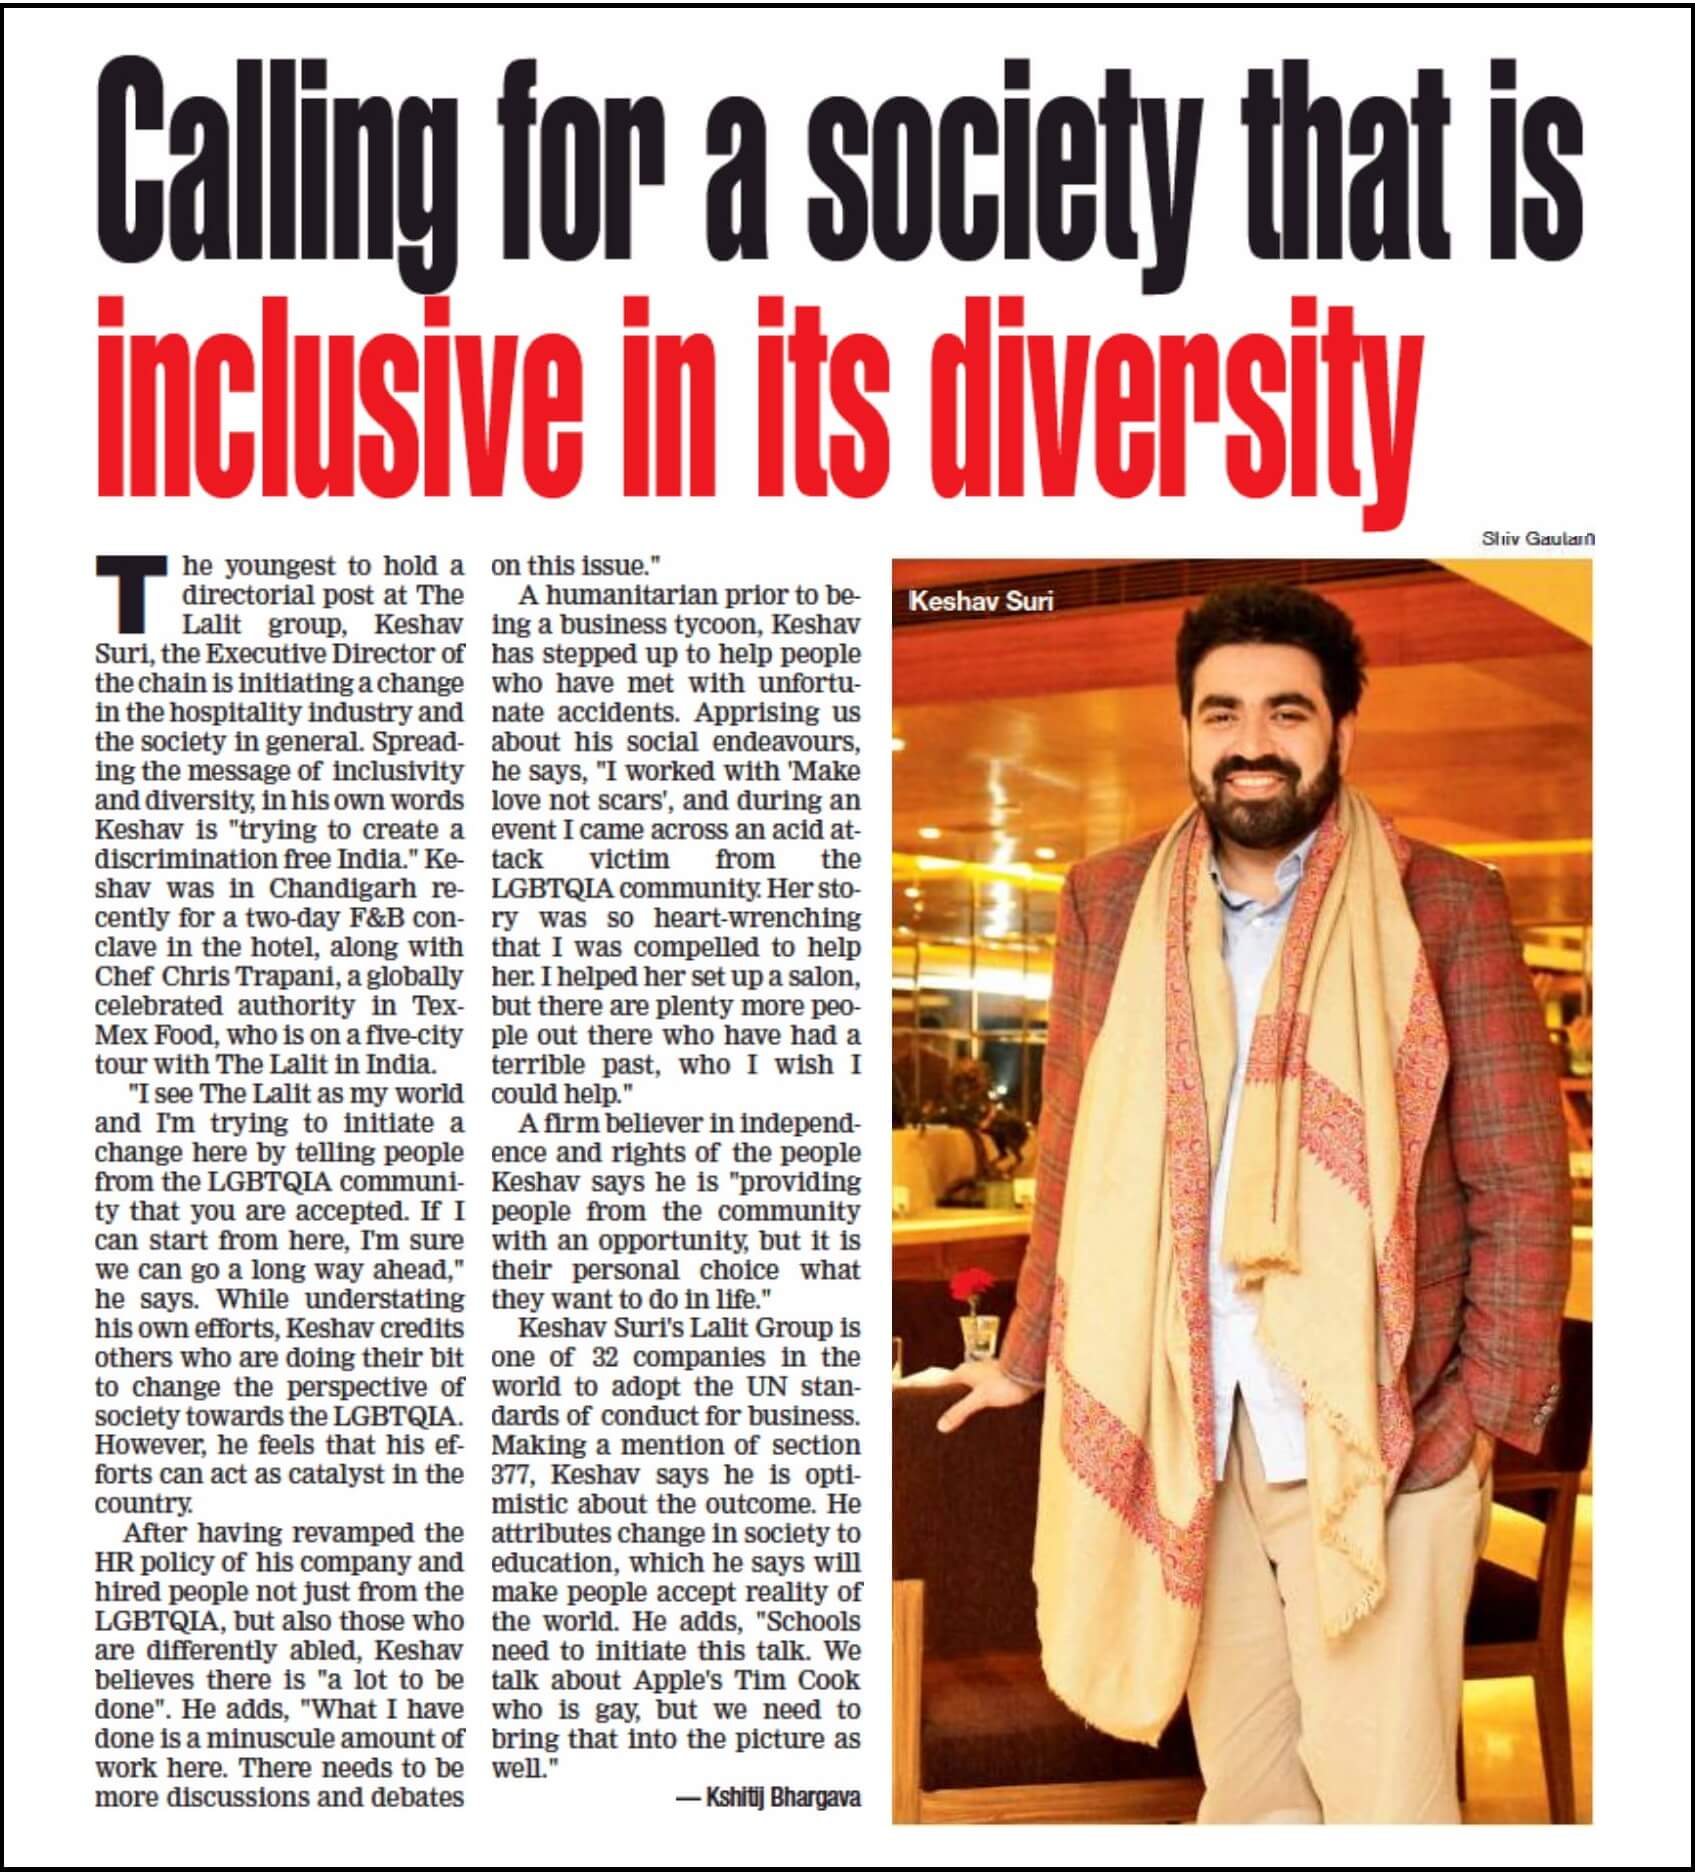 Calling for a Society that is Inclusive in its Diversity